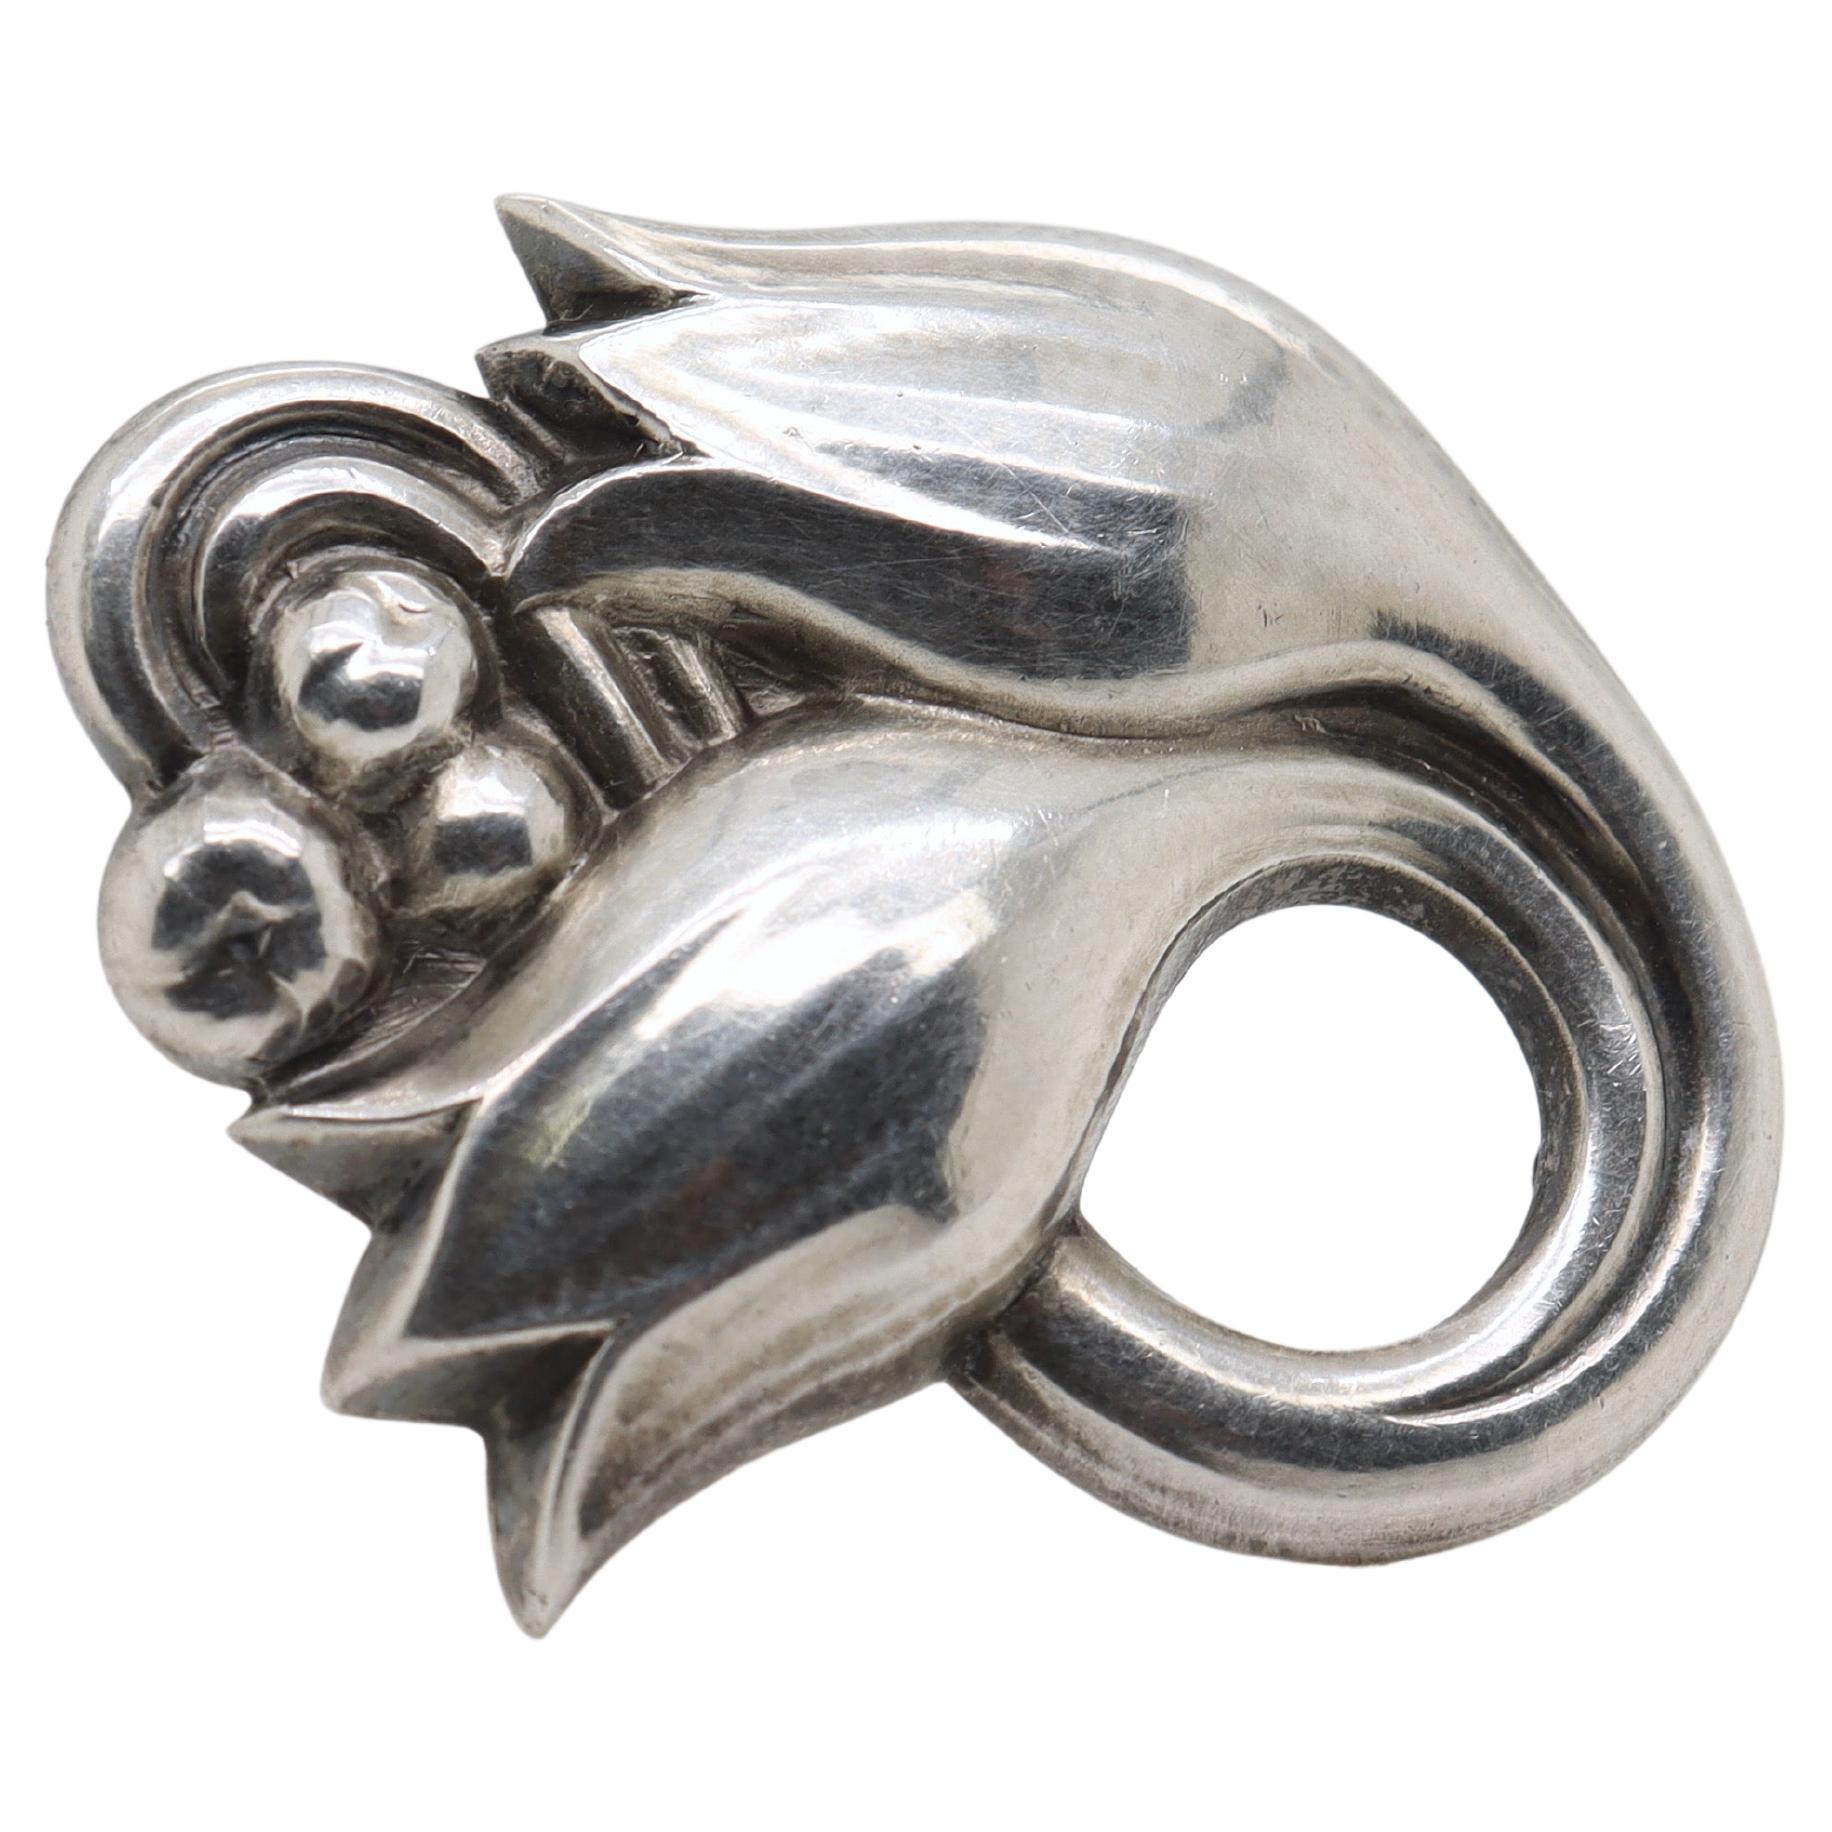 A fine Georg Jensen sterling silver pin or brooch.

Model no. 100A.

Designed by Georg Jensen.

In the form of a hand-hammered, stylized Tulip flowers and berries.

Simply a wonderful brooch from Denmark's premier silversmiths!

Date:
20th Century,